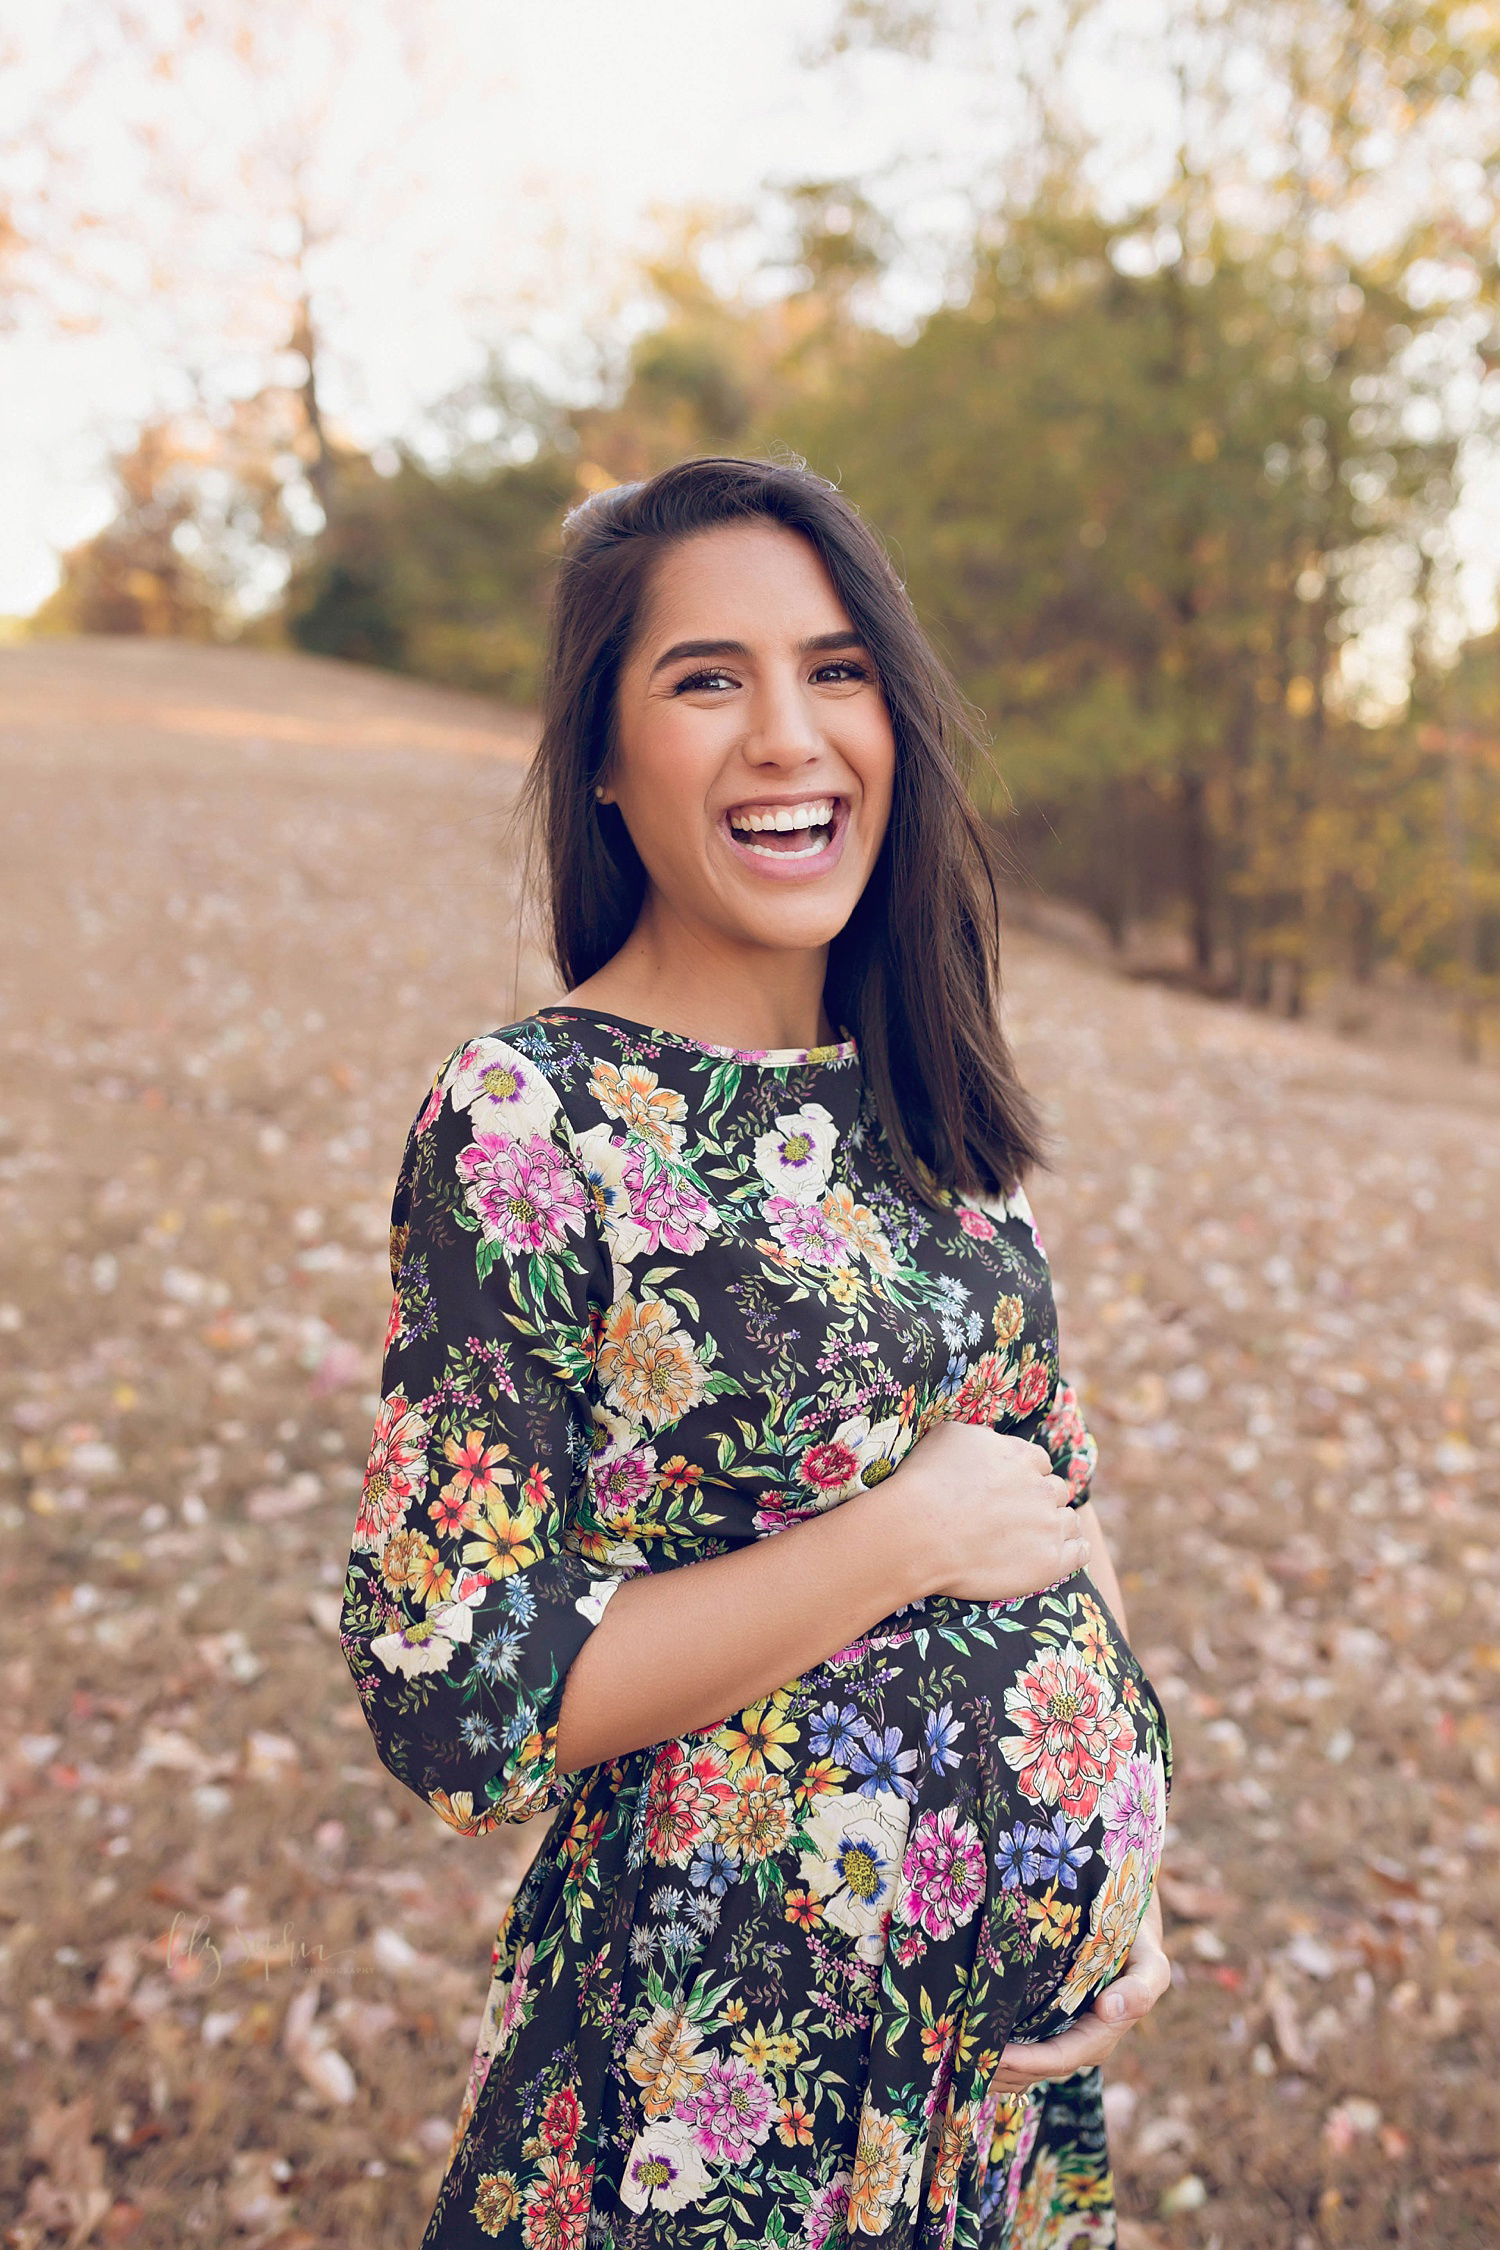  Pregnant woman wearing a floral dress smiling and laughing in a local Atlanta park.&nbsp; 